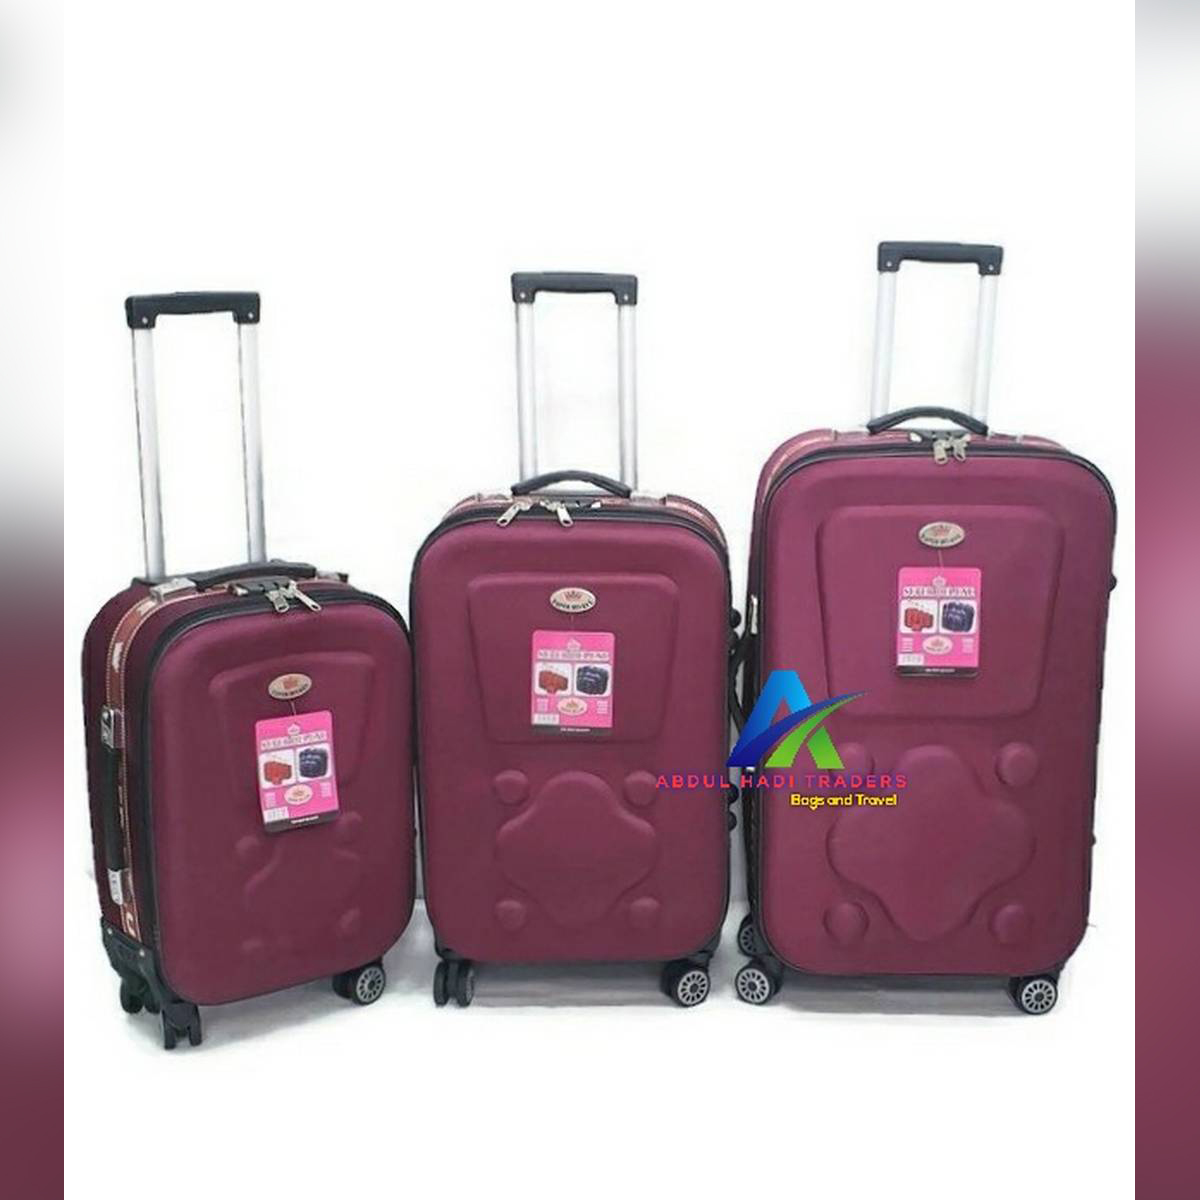 JJ Merchandising and Hardware | ✈️🧳NEW SUITCASES AND SUITCASE SETS  AVAILABLE NOW🧳✈️ Specs: ✓ 2 Non-Rotational Wheels ✓ Fabric Material ✓  Extended Ha... | Instagram